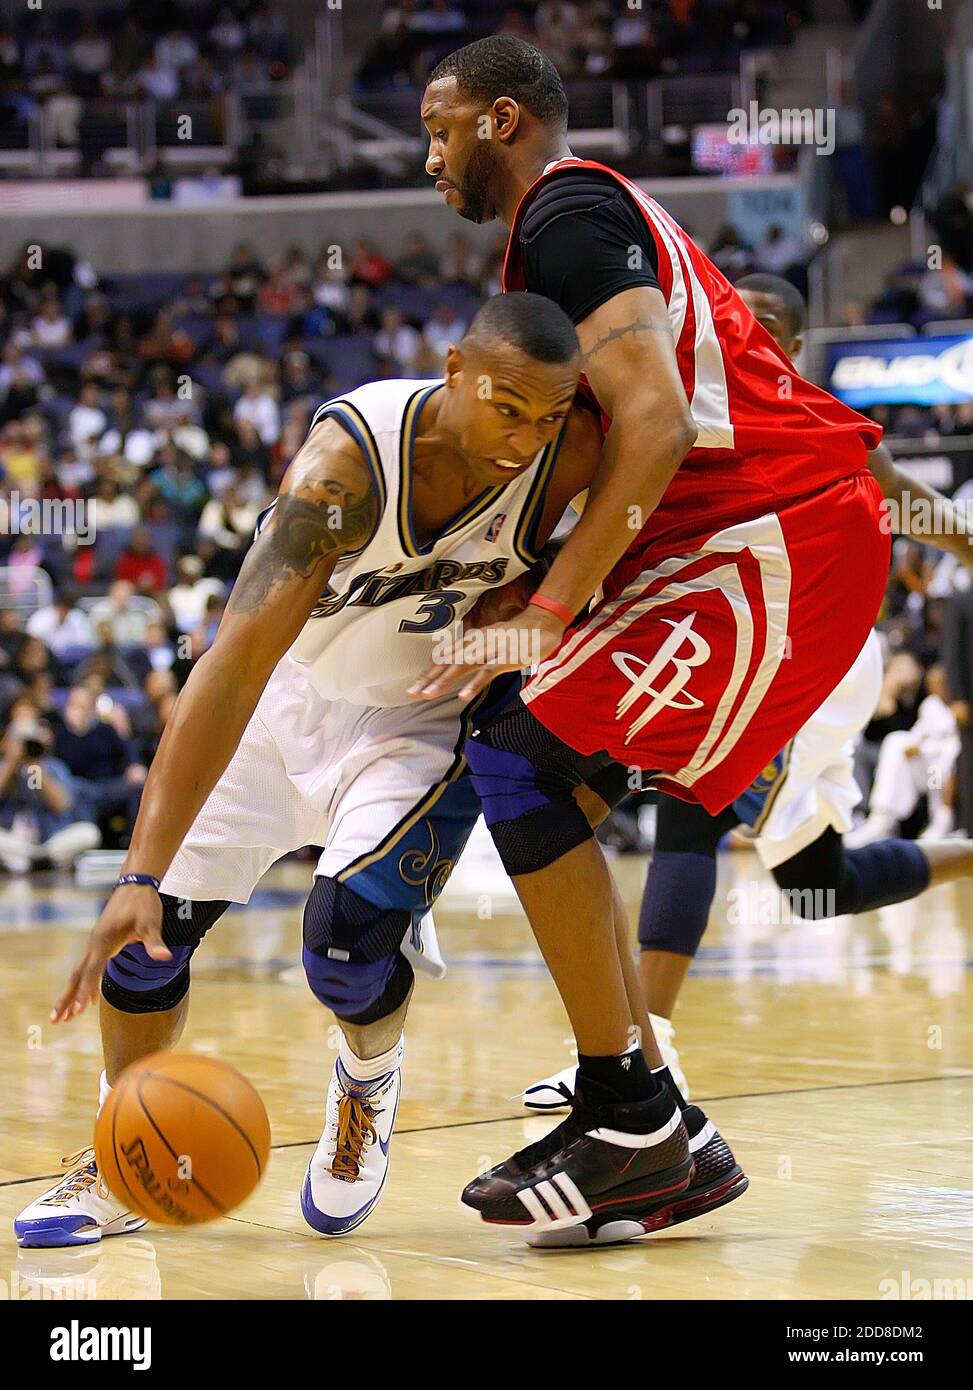 NO FILM, NO VIDEO, NO TV, NO DOCUMENTARY - Washington Wizards Caron Butler (3) drives against Houston Rockets Tracy McGrady (1) during their game played at the Verizon Center in Washington, D.C., Friday night, November 21, 2008. Houston won the game 102-91. Photo by Harry E. Walker/MCT/ABACAPRESS.COM Stock Photo